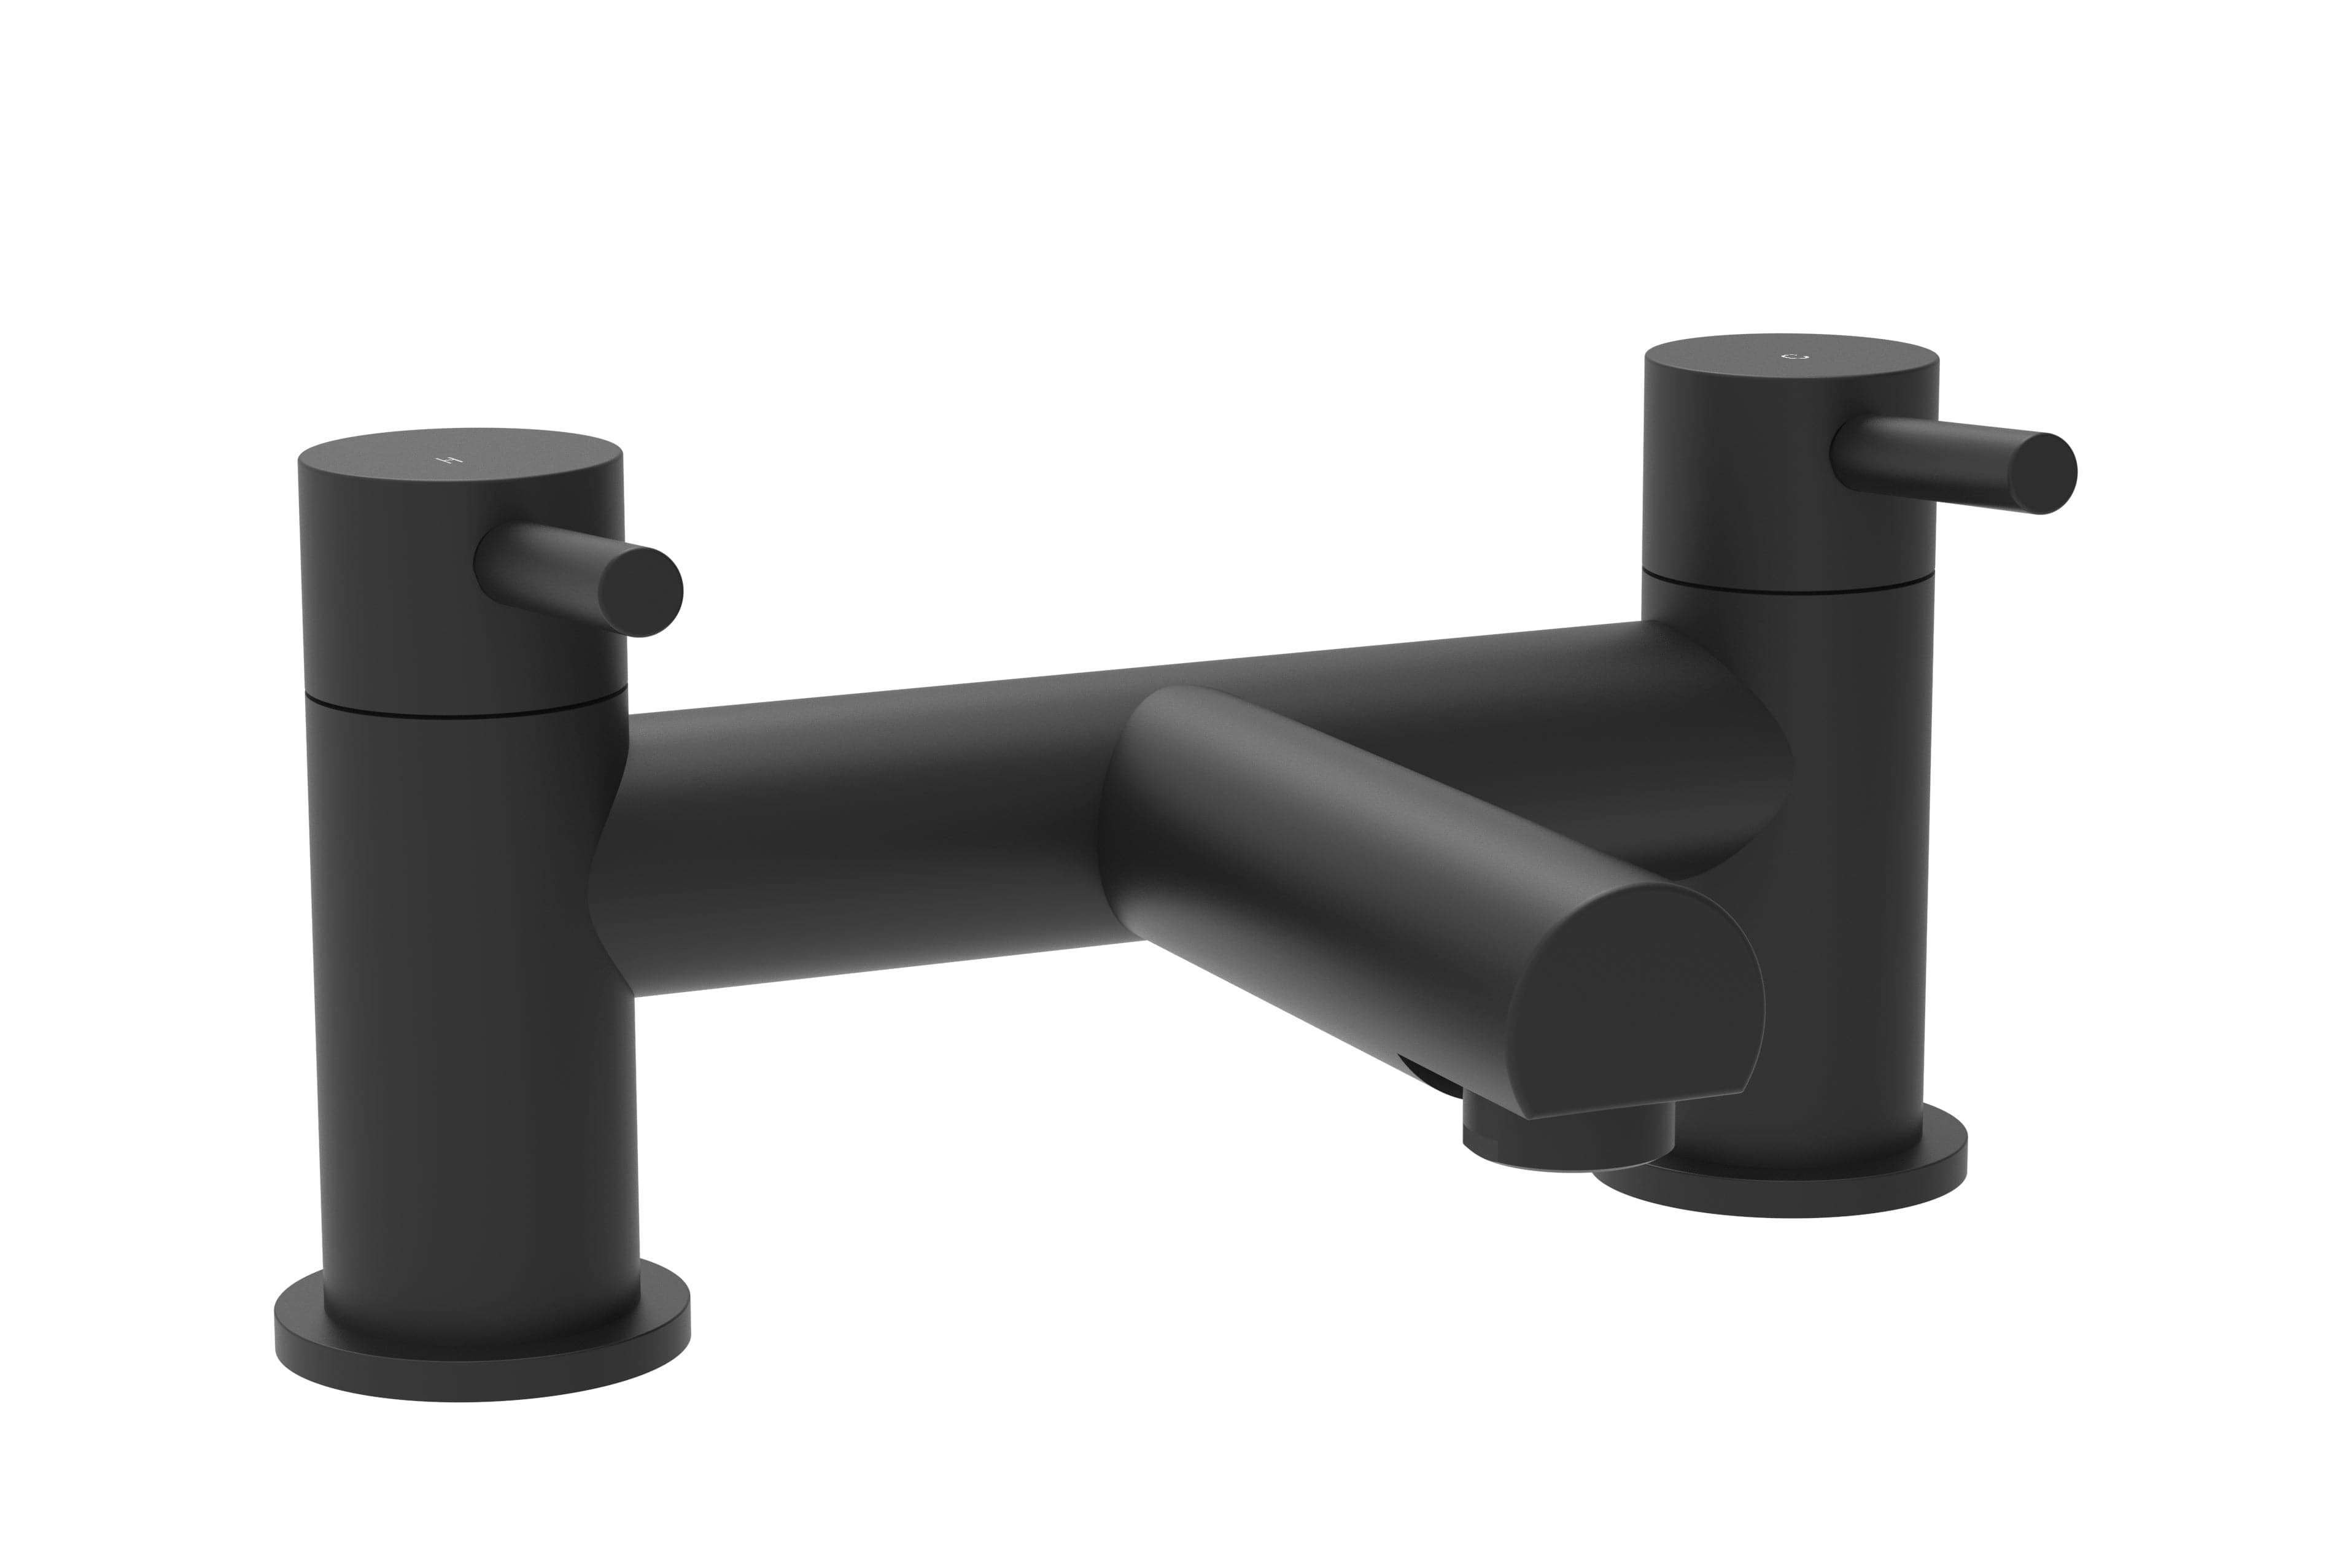 Dixon Round Bath Filler Mixer Tap in Matt Black - Stylish design, ideal for modern bathrooms. Buy now for luxury and elegance. 